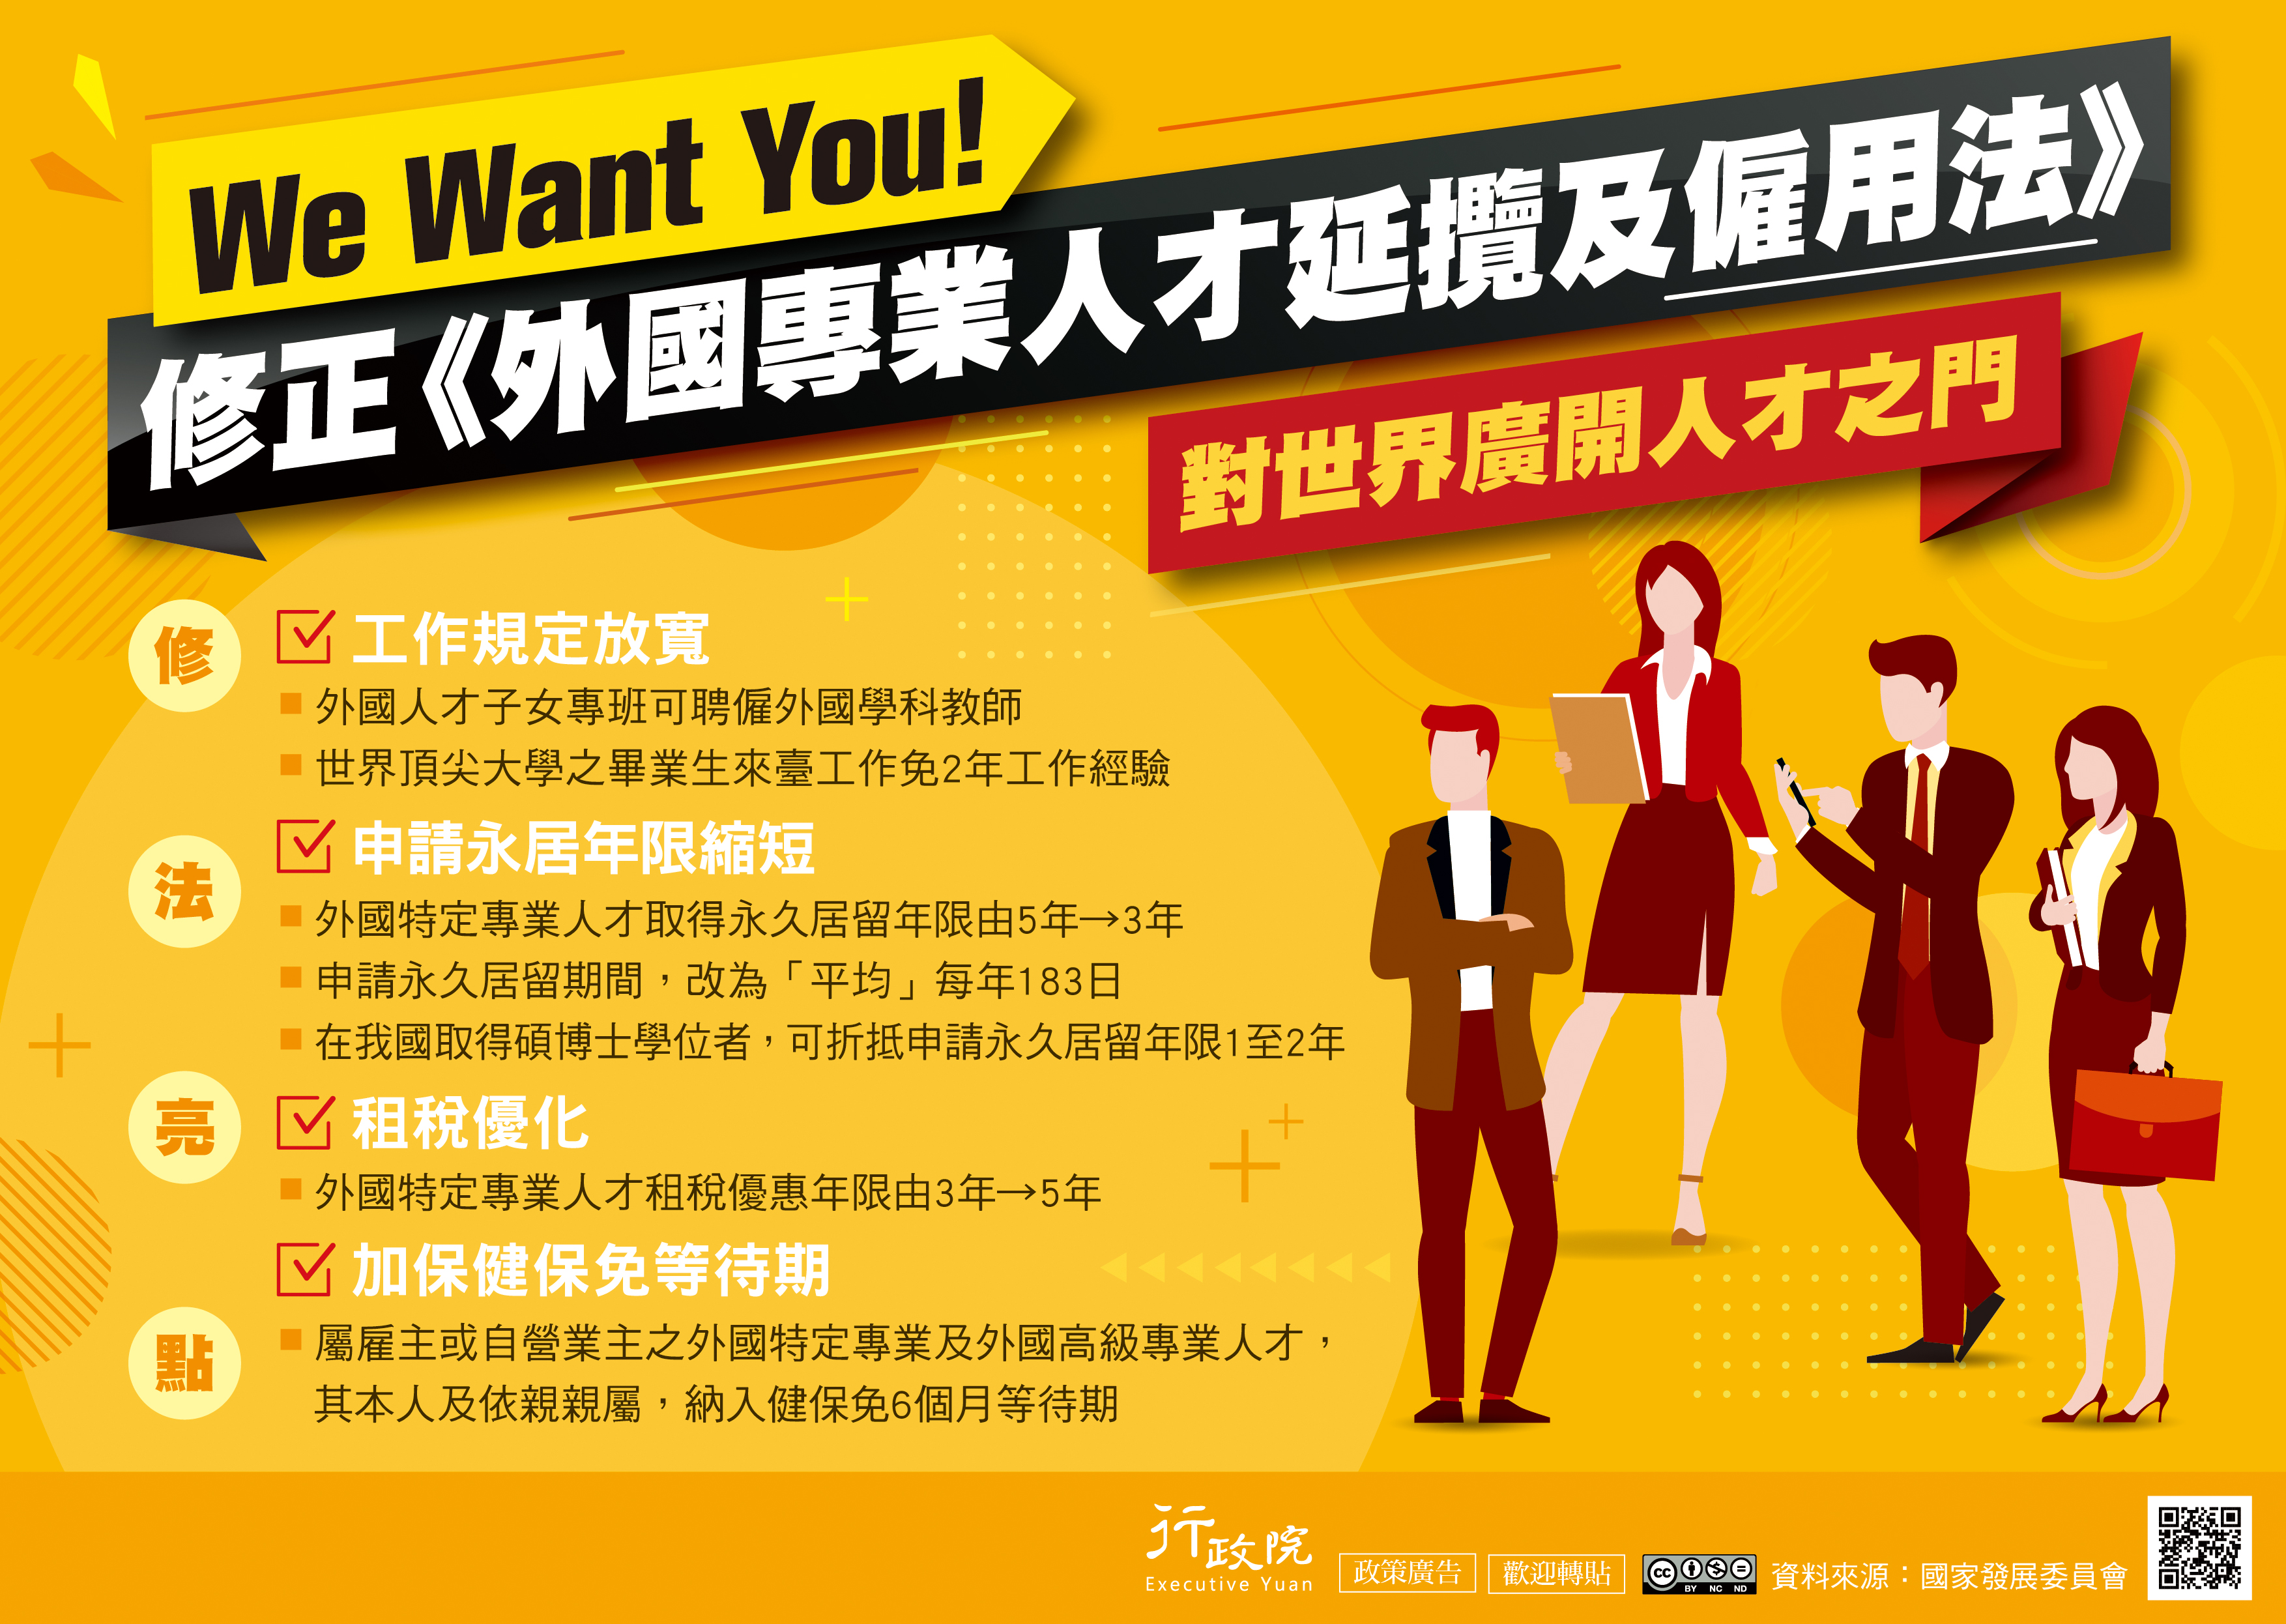 4 main points of the Act to attract foreign professionals. (Photo / Provided by the NDC)